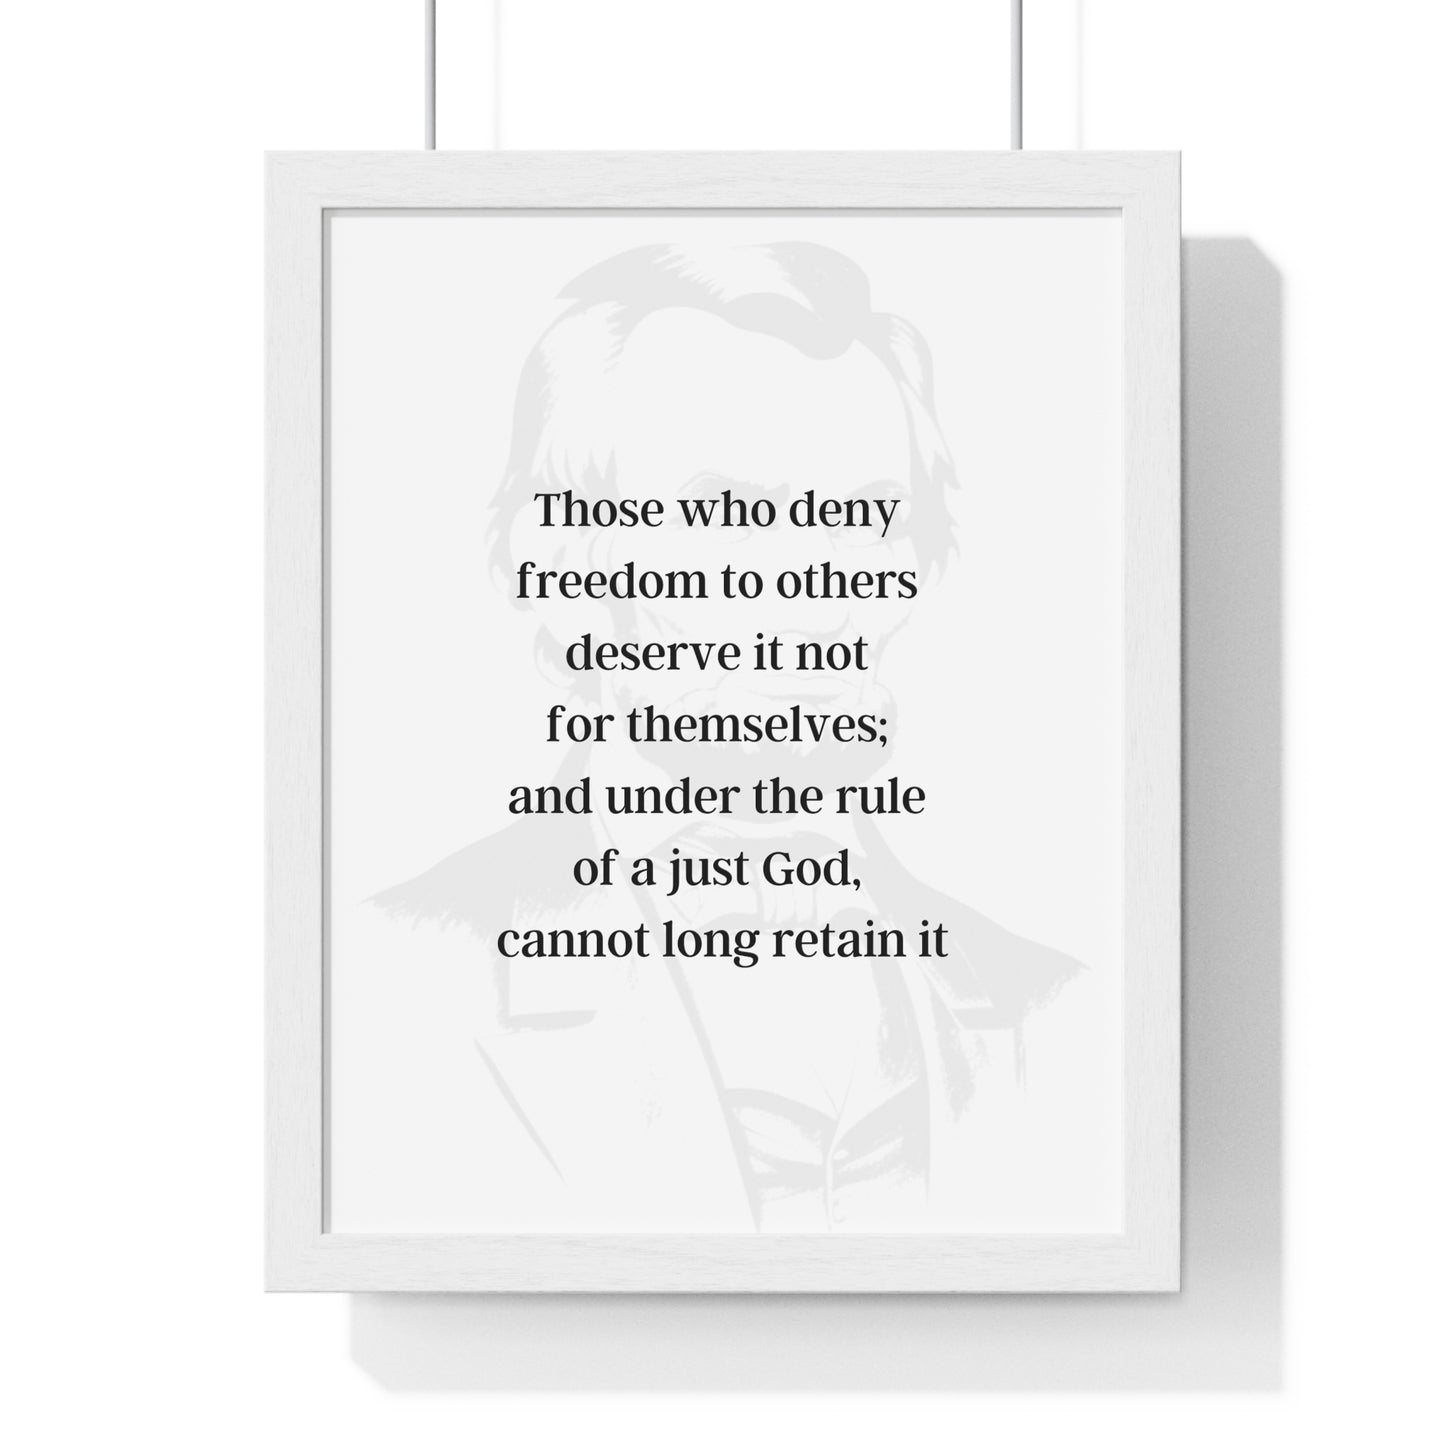 Abraham Lincoln Quote 8, Poster Art, Light Print with Dark Lettering, 16th President of the United States, American Patriots, AI Art, Political Art, Poster Prints, Presidential Portraits, Presidential Quotes, Inspirational Quotes